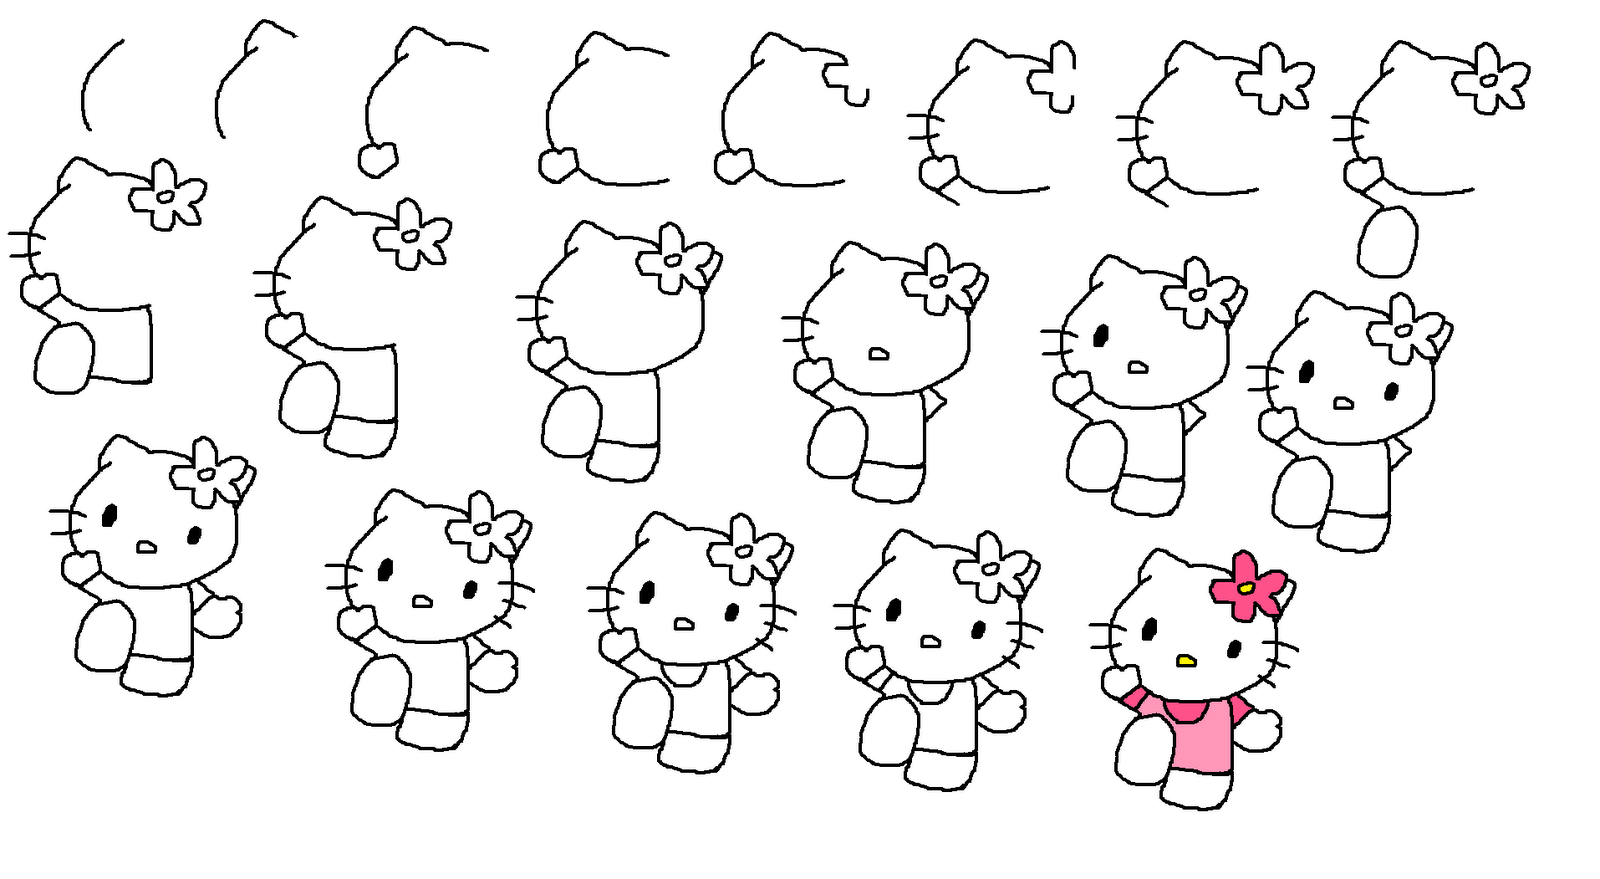 HOW TO DRAW HELLO KITTY